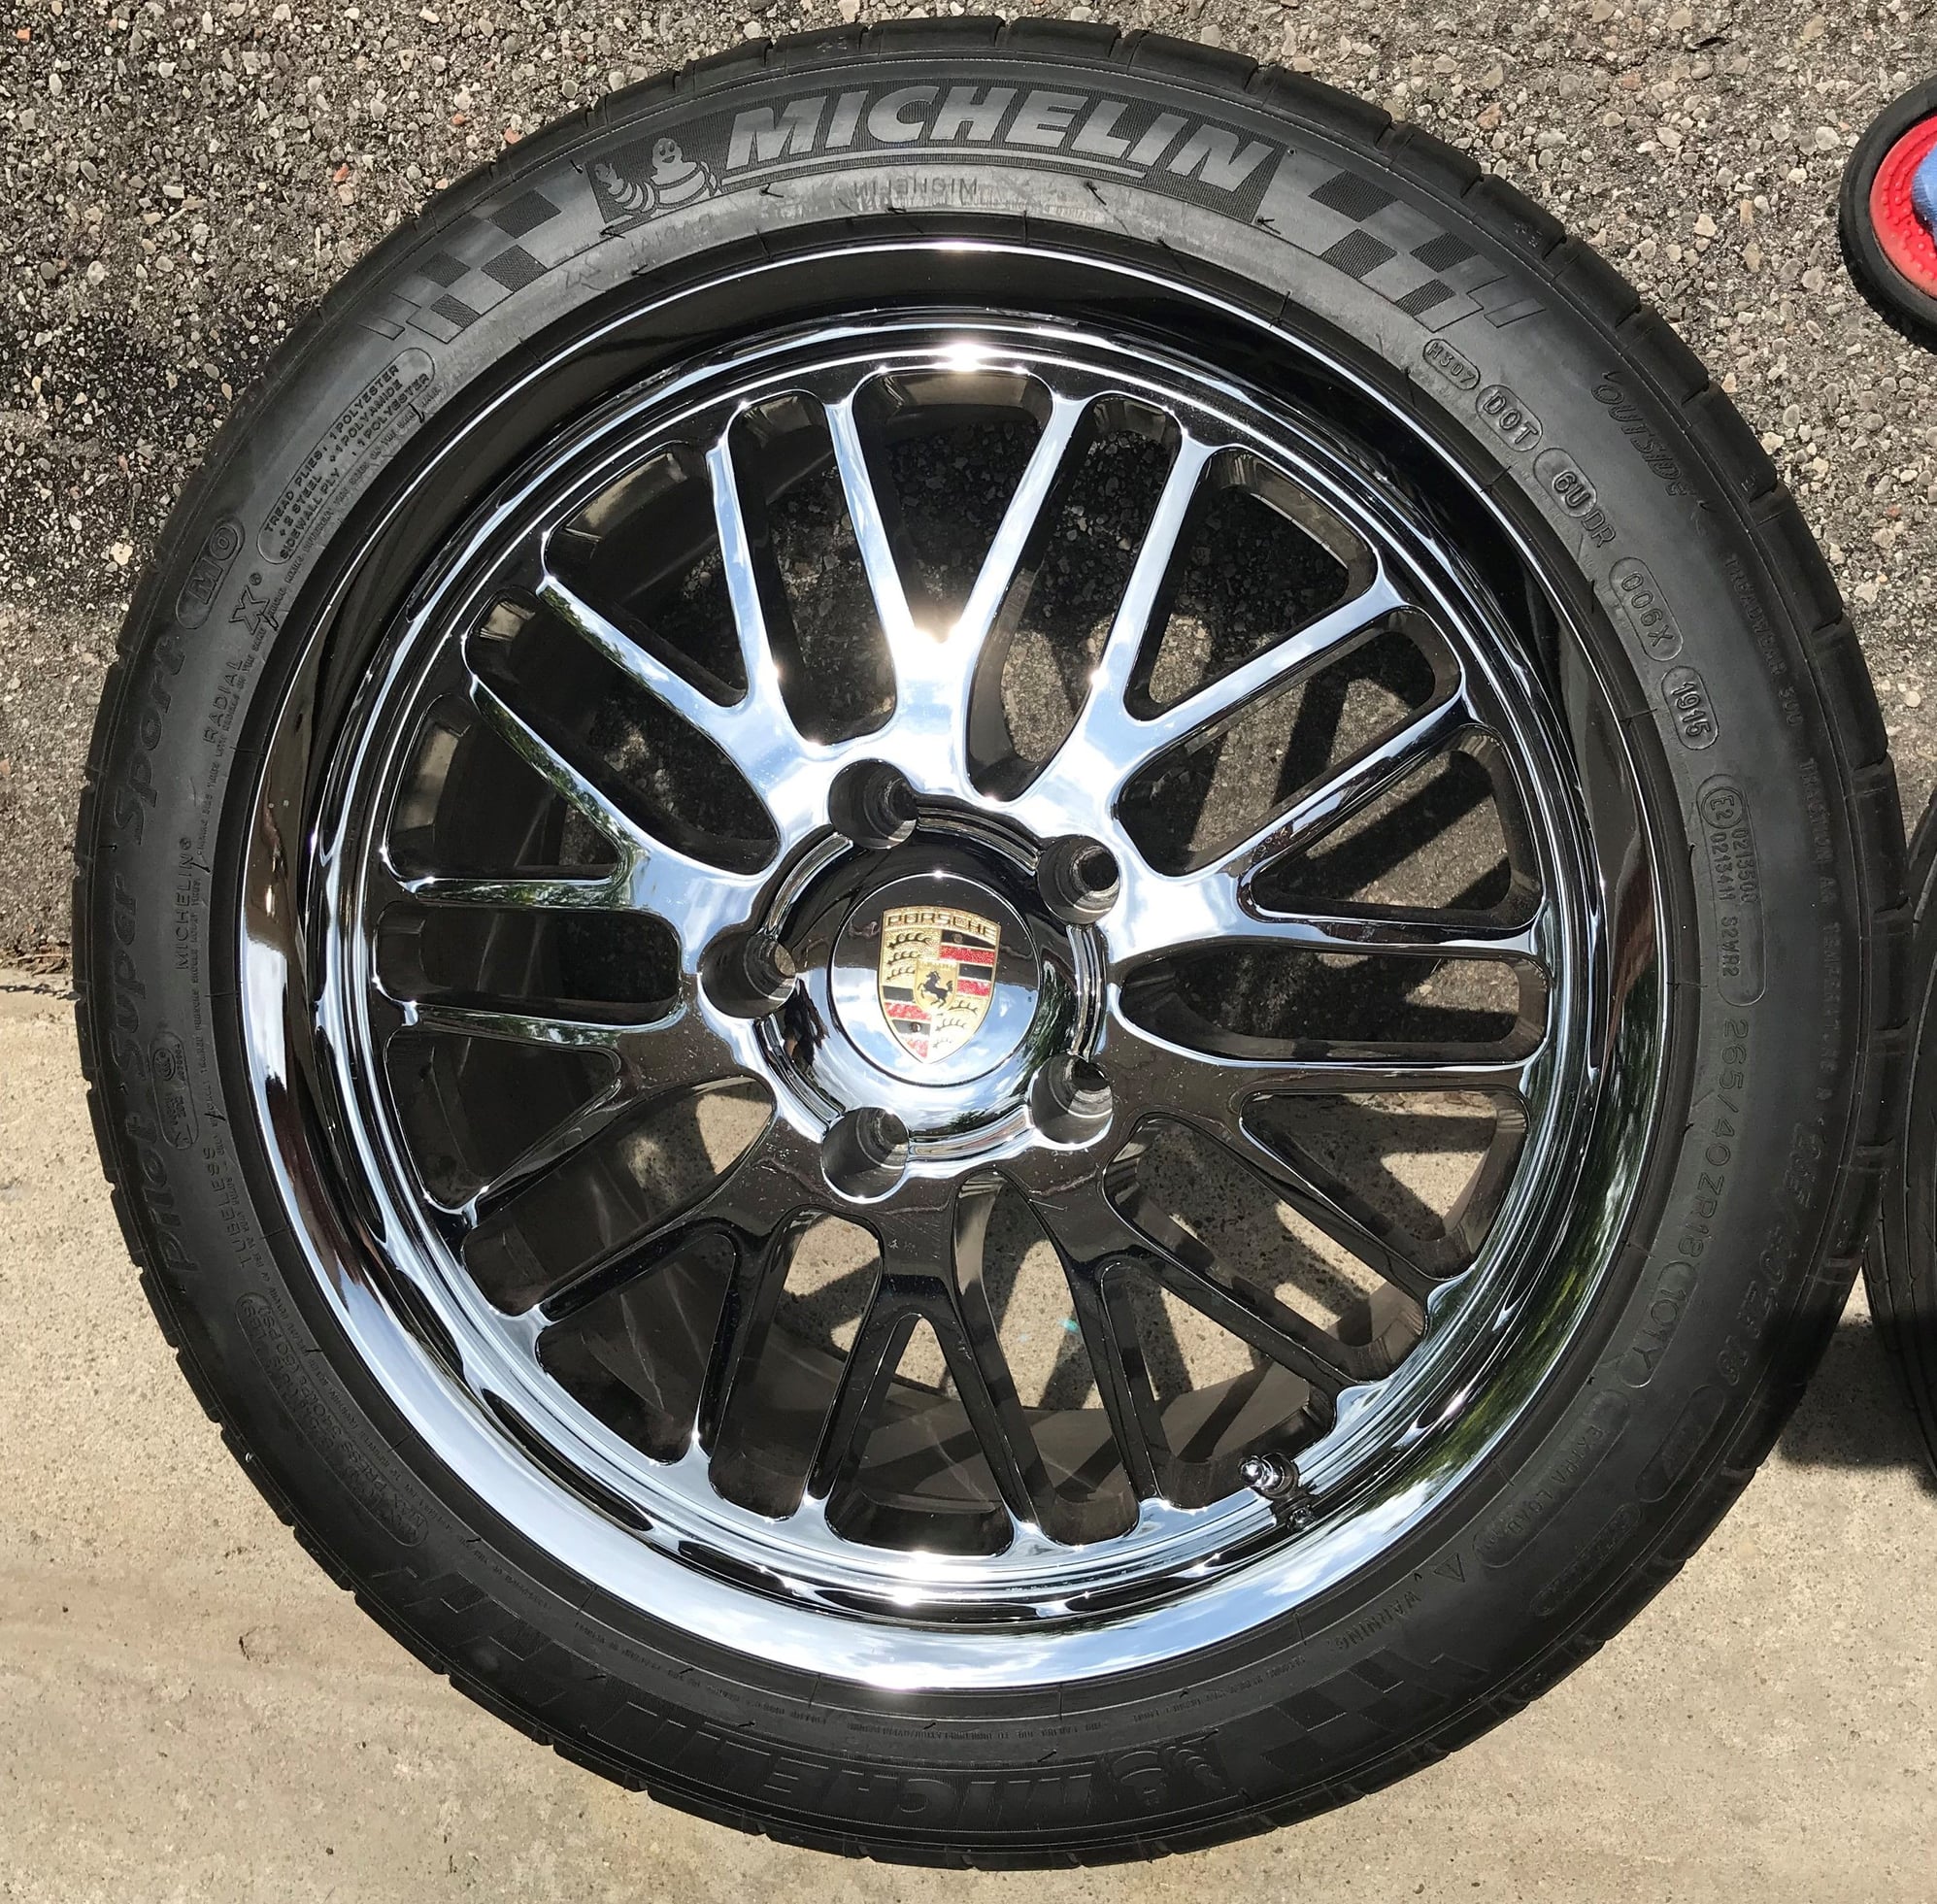 Wheels and Tires/Axles - 18' Victor Wheels with Michelin PSS tires - Used - 1980 to 2019 Porsche All Models - Toronto, ON L4J5N3, Canada